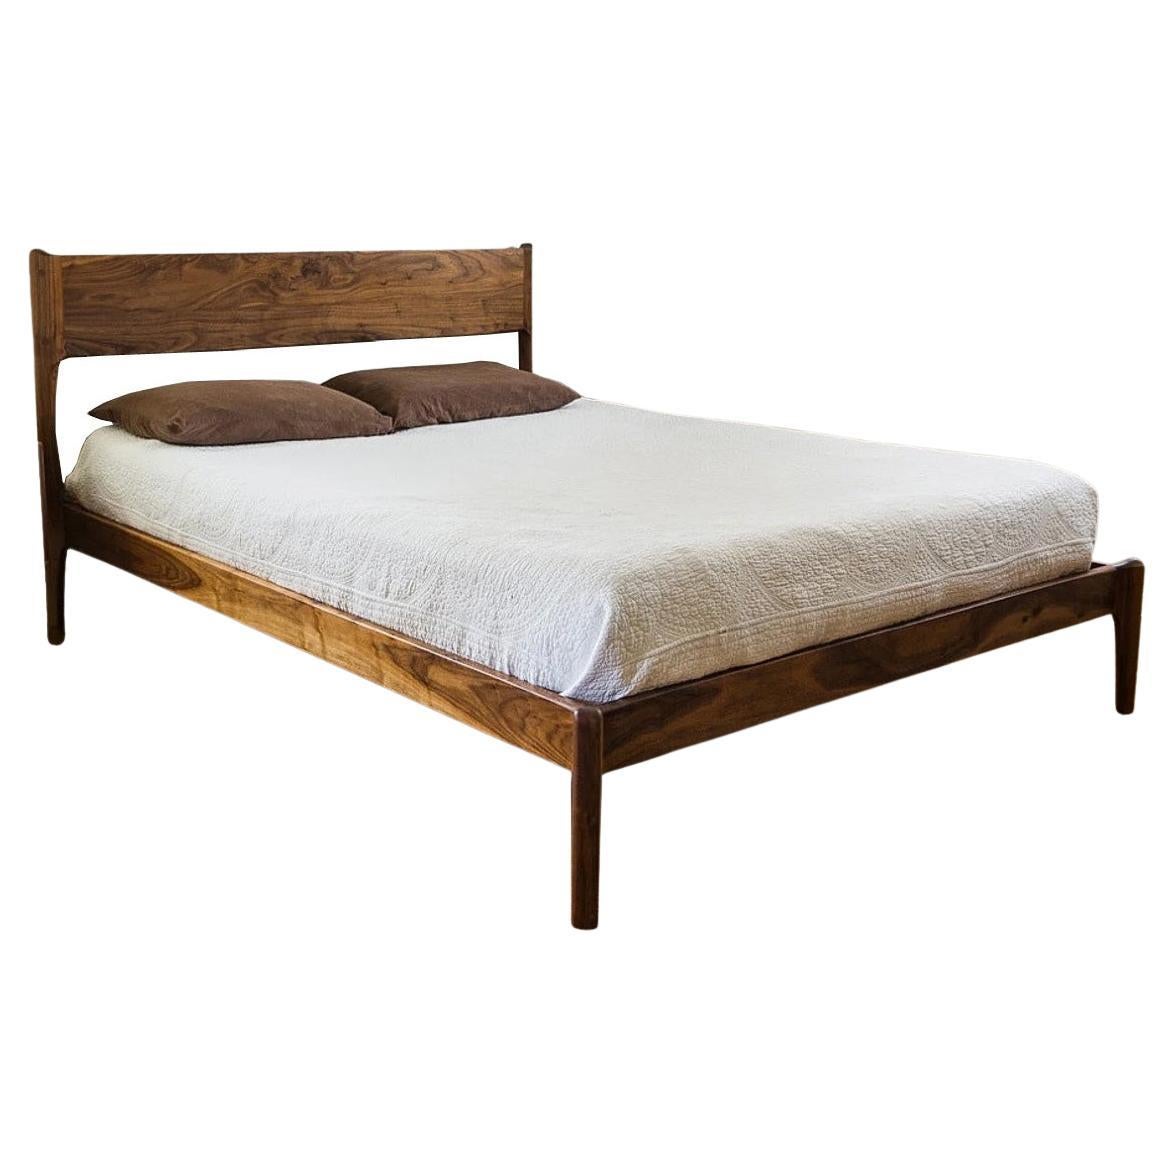 Classic Modern Bed by Pete Deeble Midcentury Walnut Cherry Rosewood King